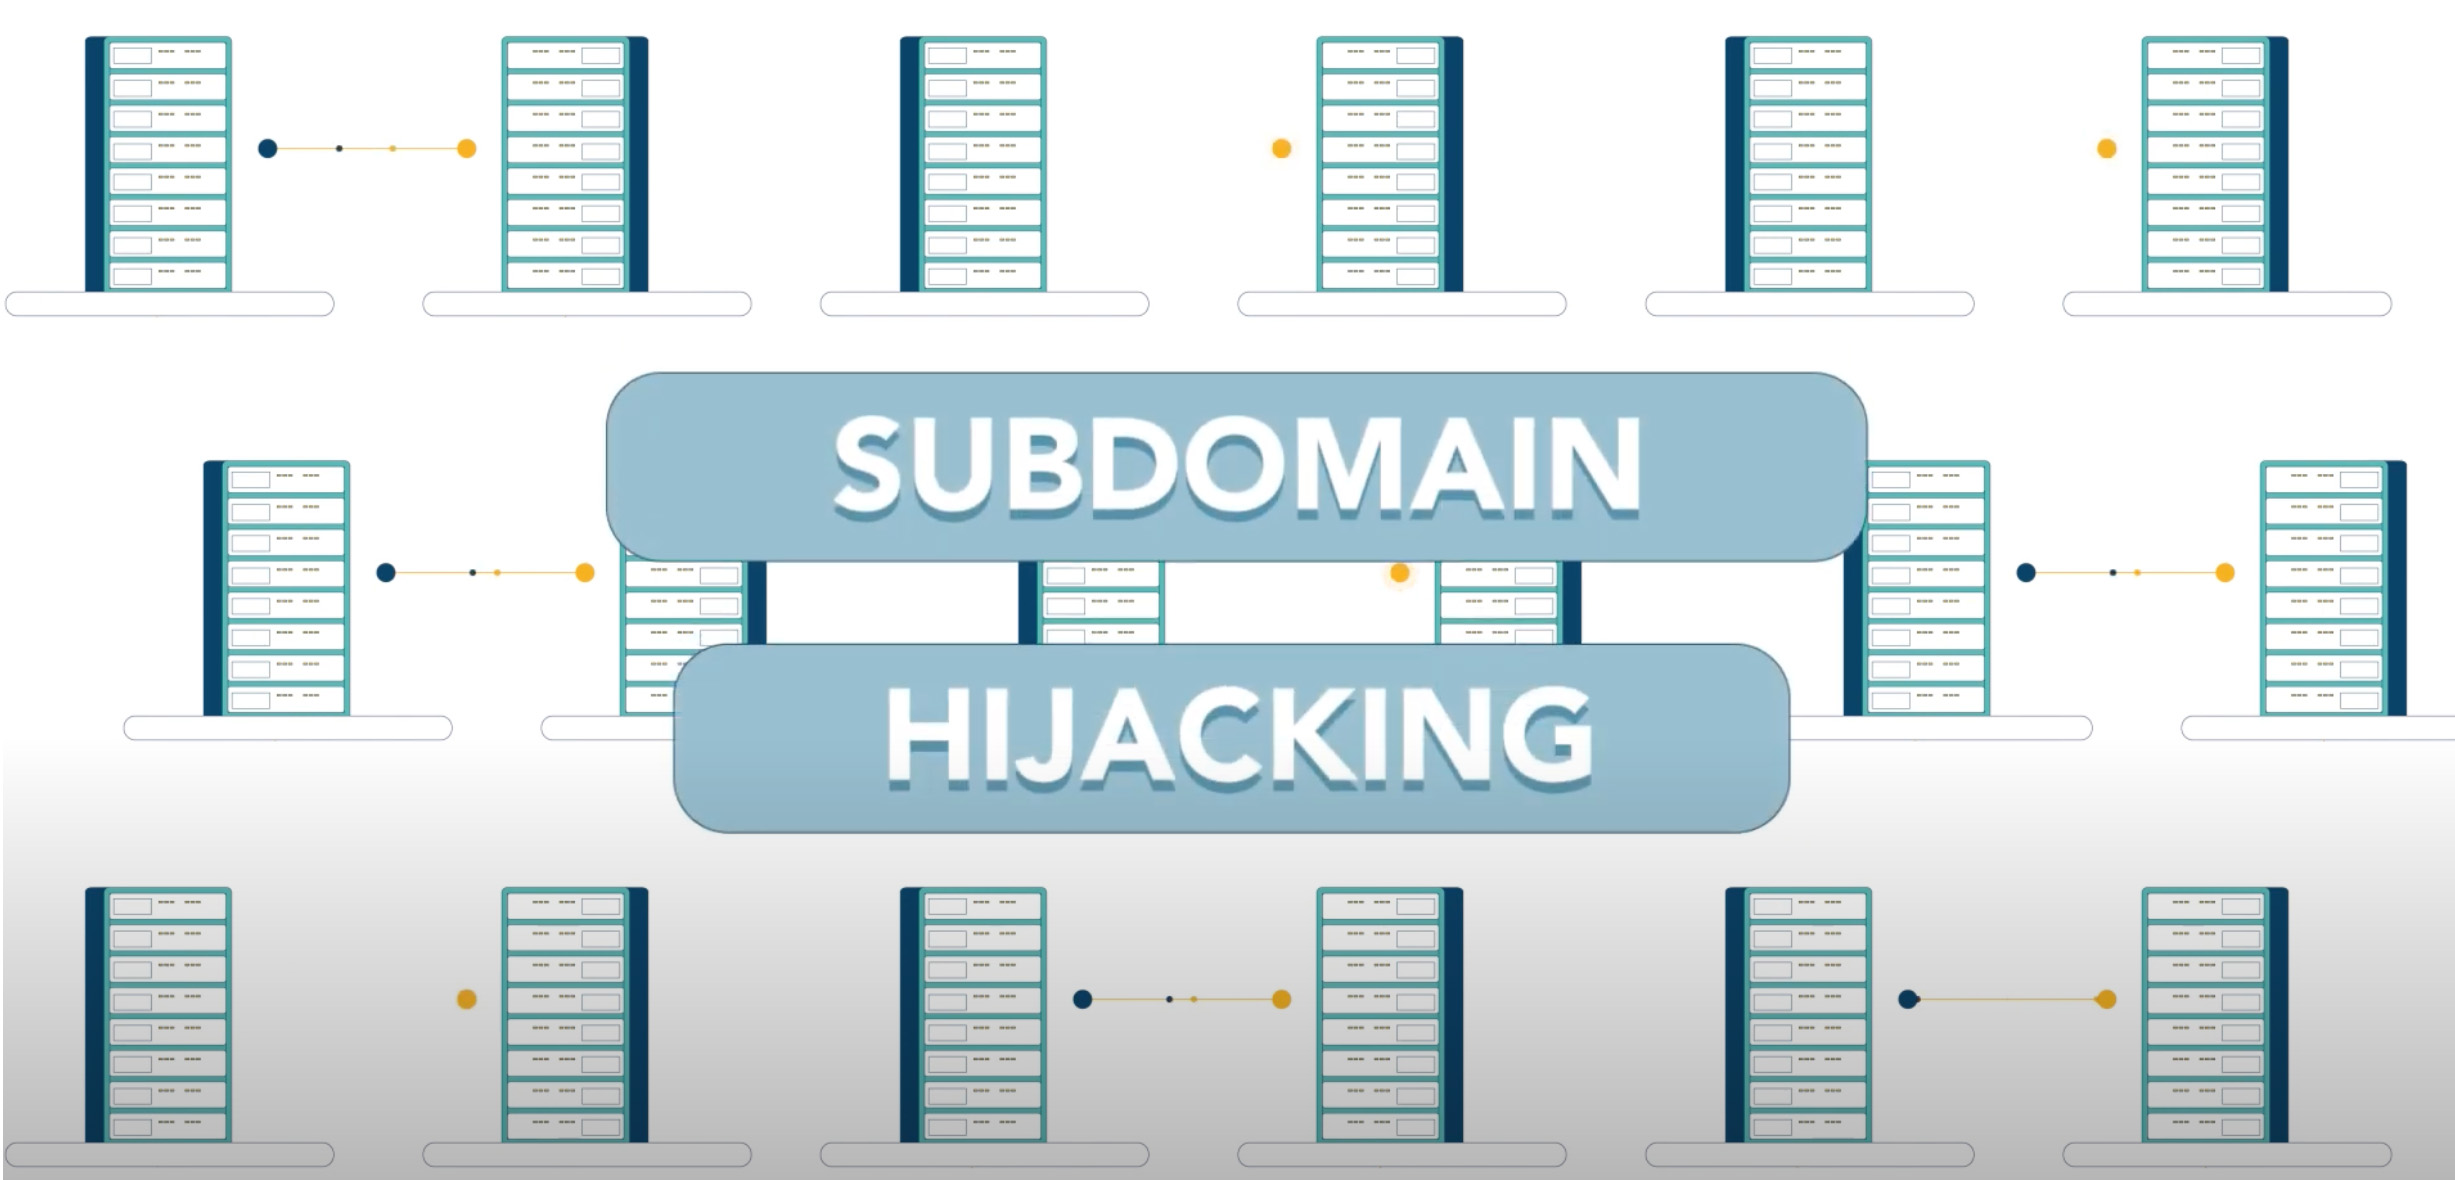 Watch our Subdomain Hijacking video